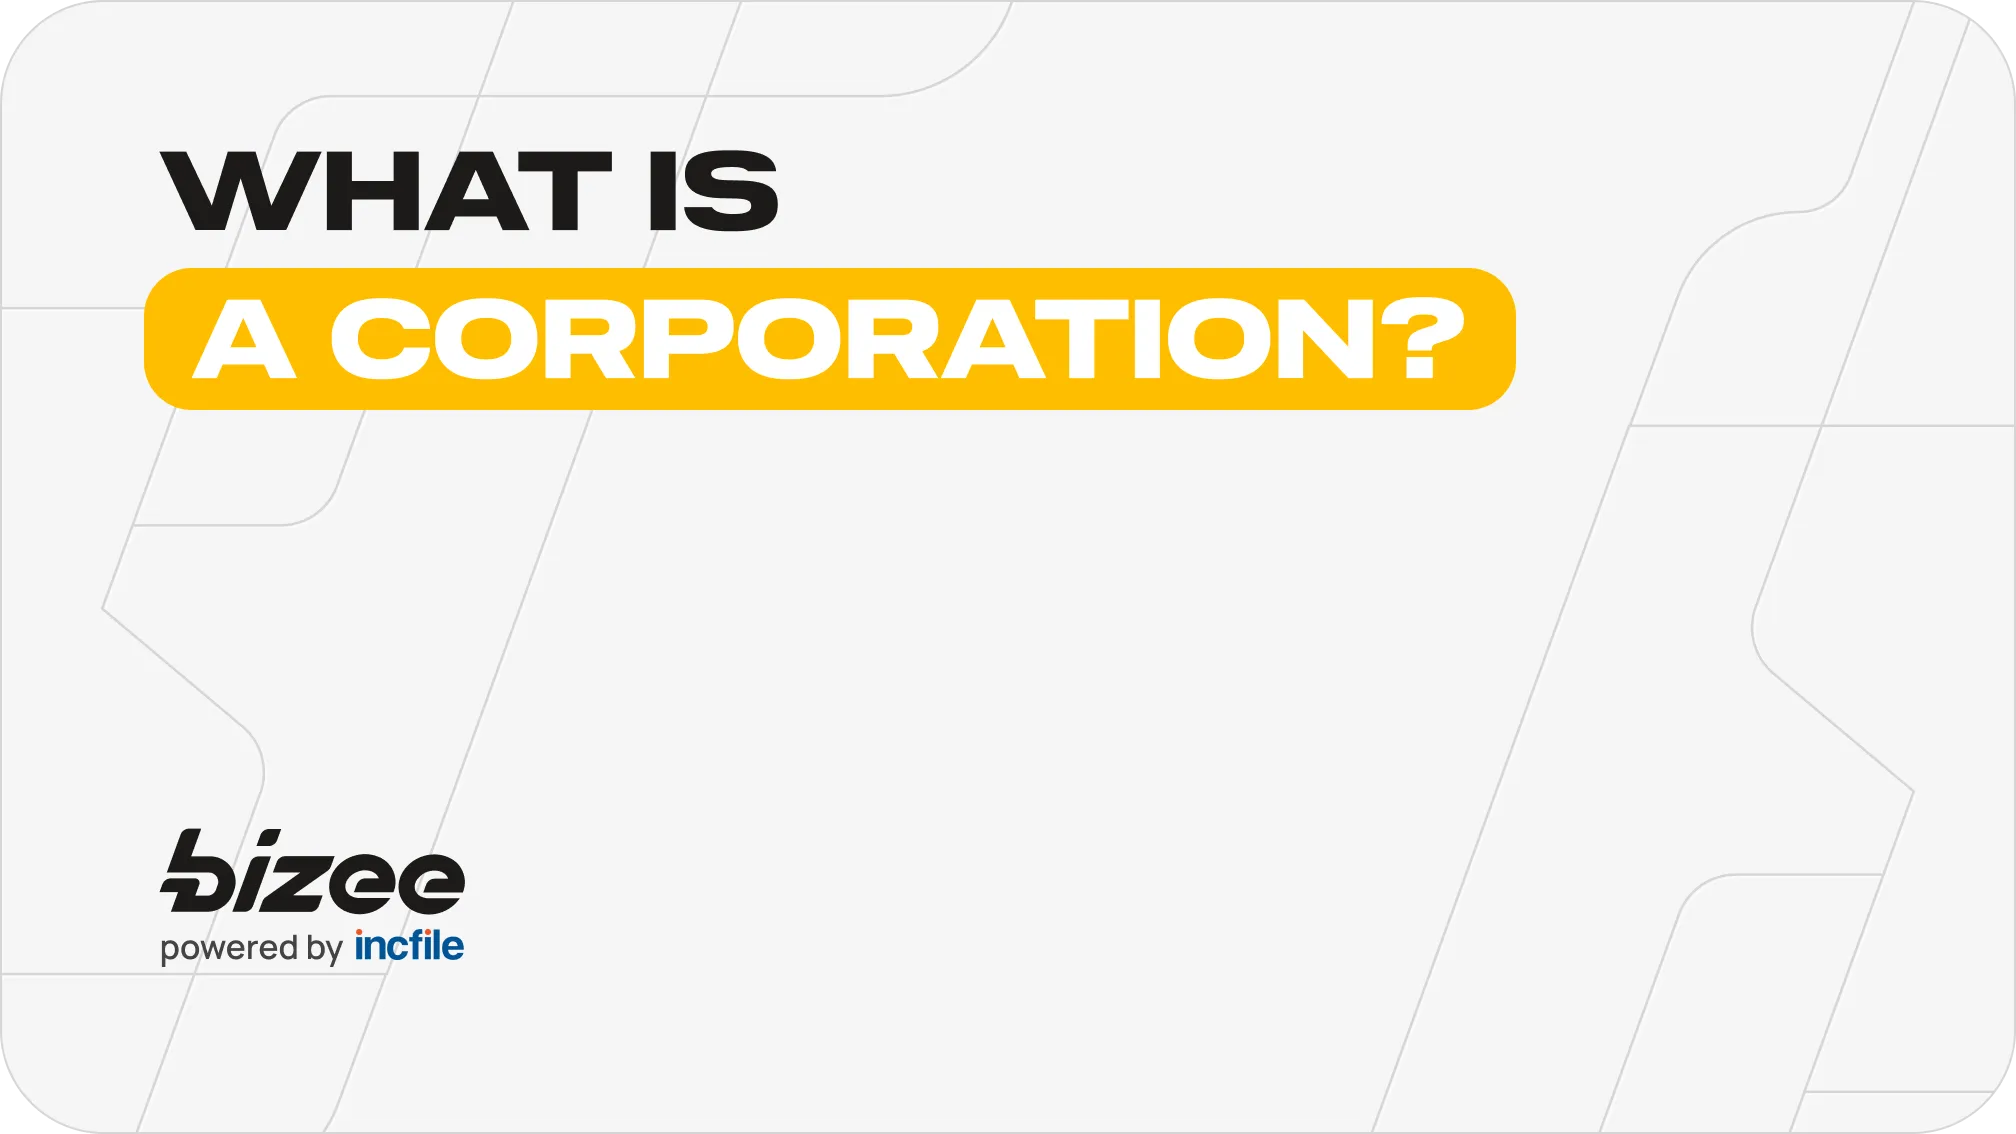 What is a Corporation?